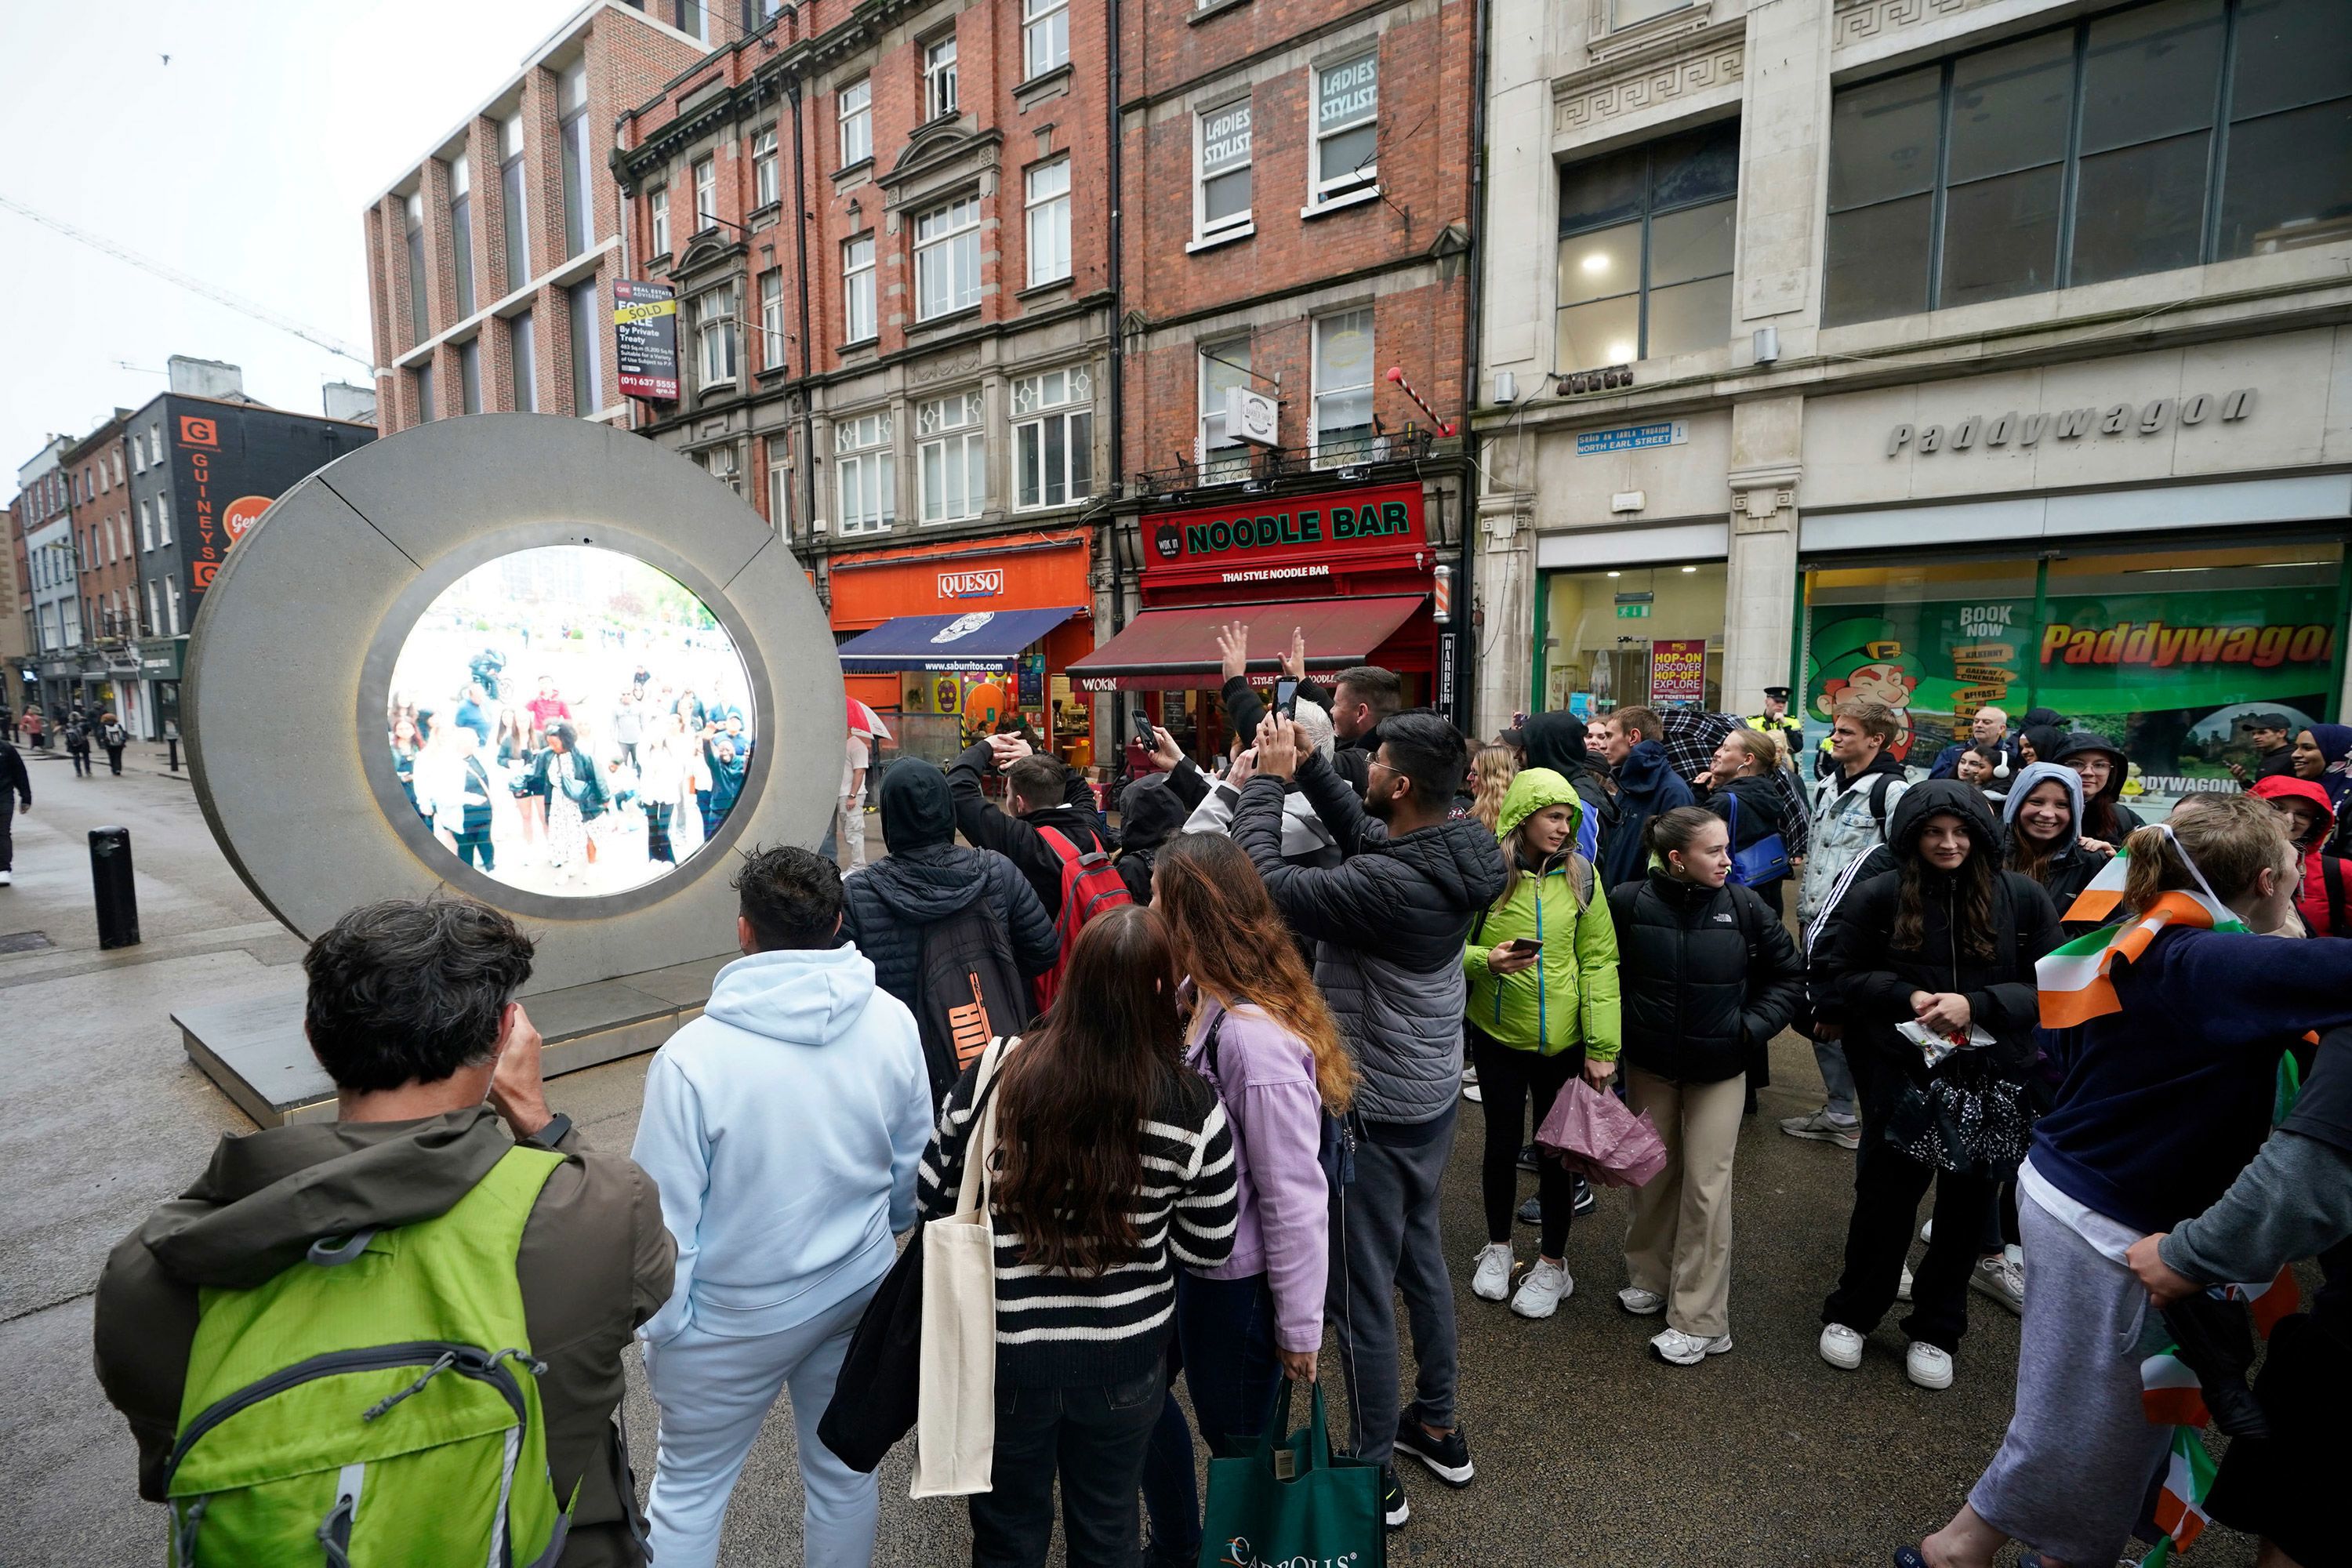 People view the live stream between Dublin and New York, in Dublin, Ireland, on May 13.